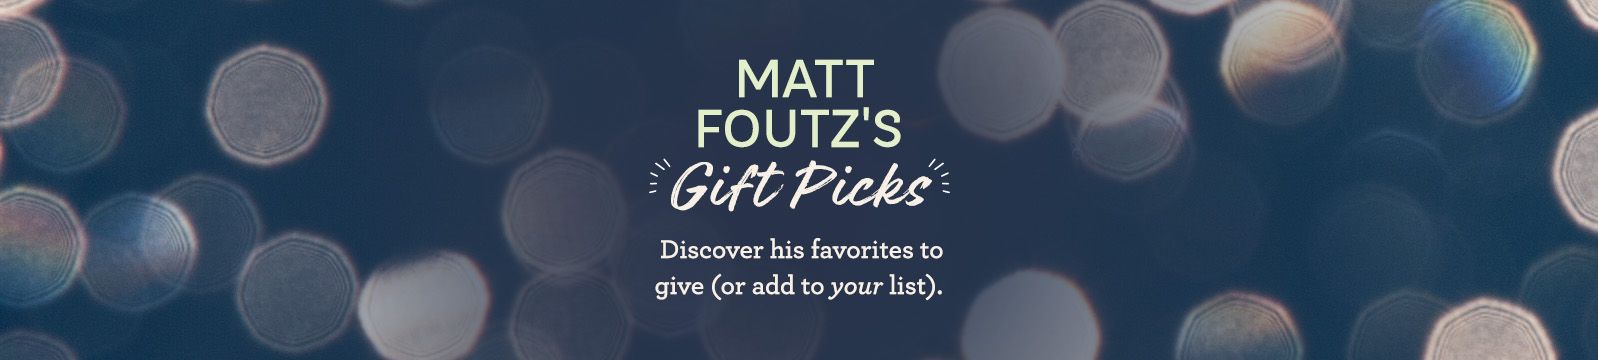 Matt Foutz's Gift Picks.  Discover his favorites to give (or add to your list).